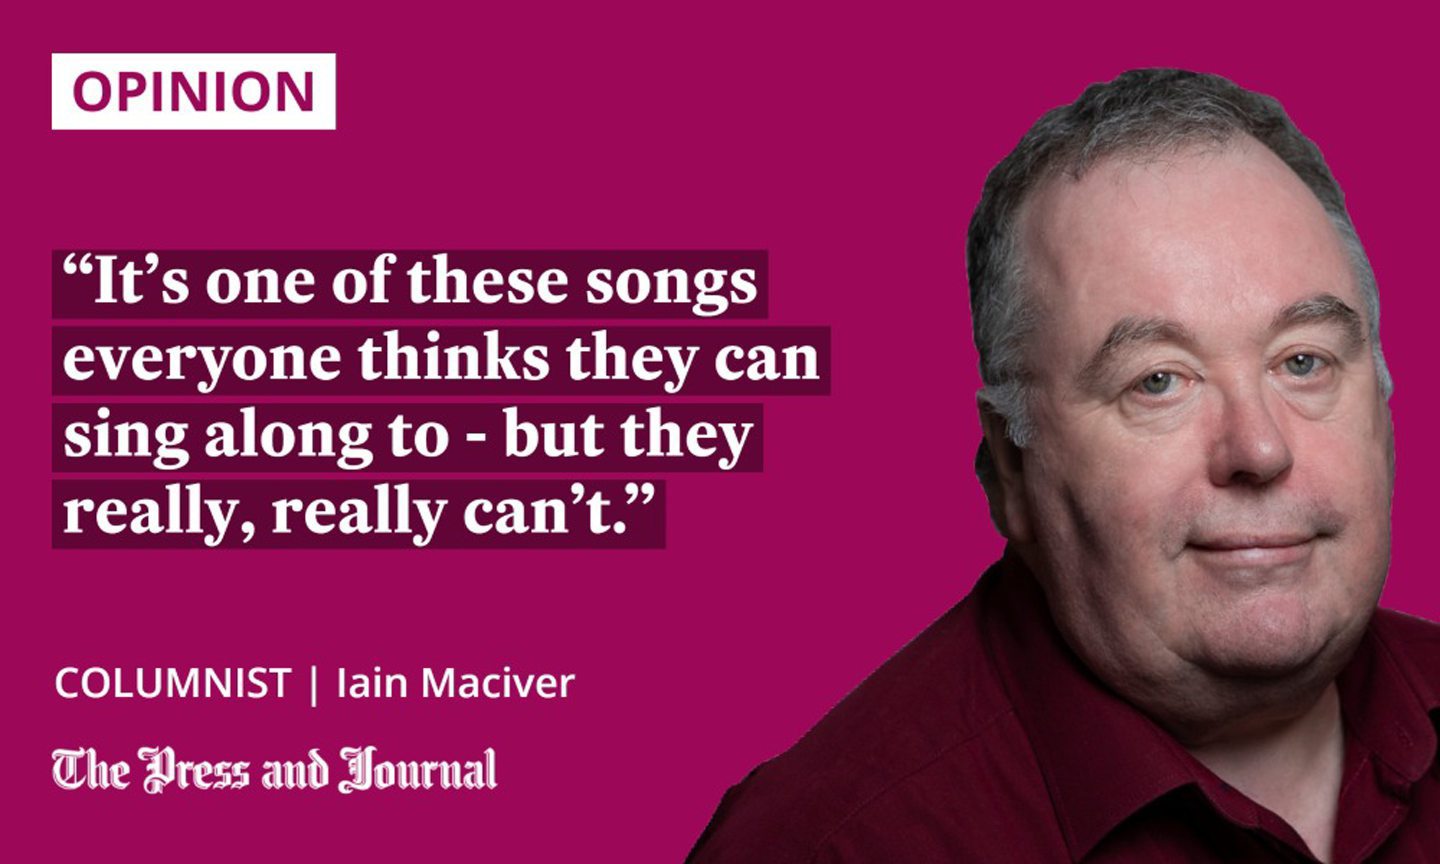 Quotation from columnist Iain Maciver: 'It's one of these songs everyone thinks they can sing along to - but they really, really can't.'